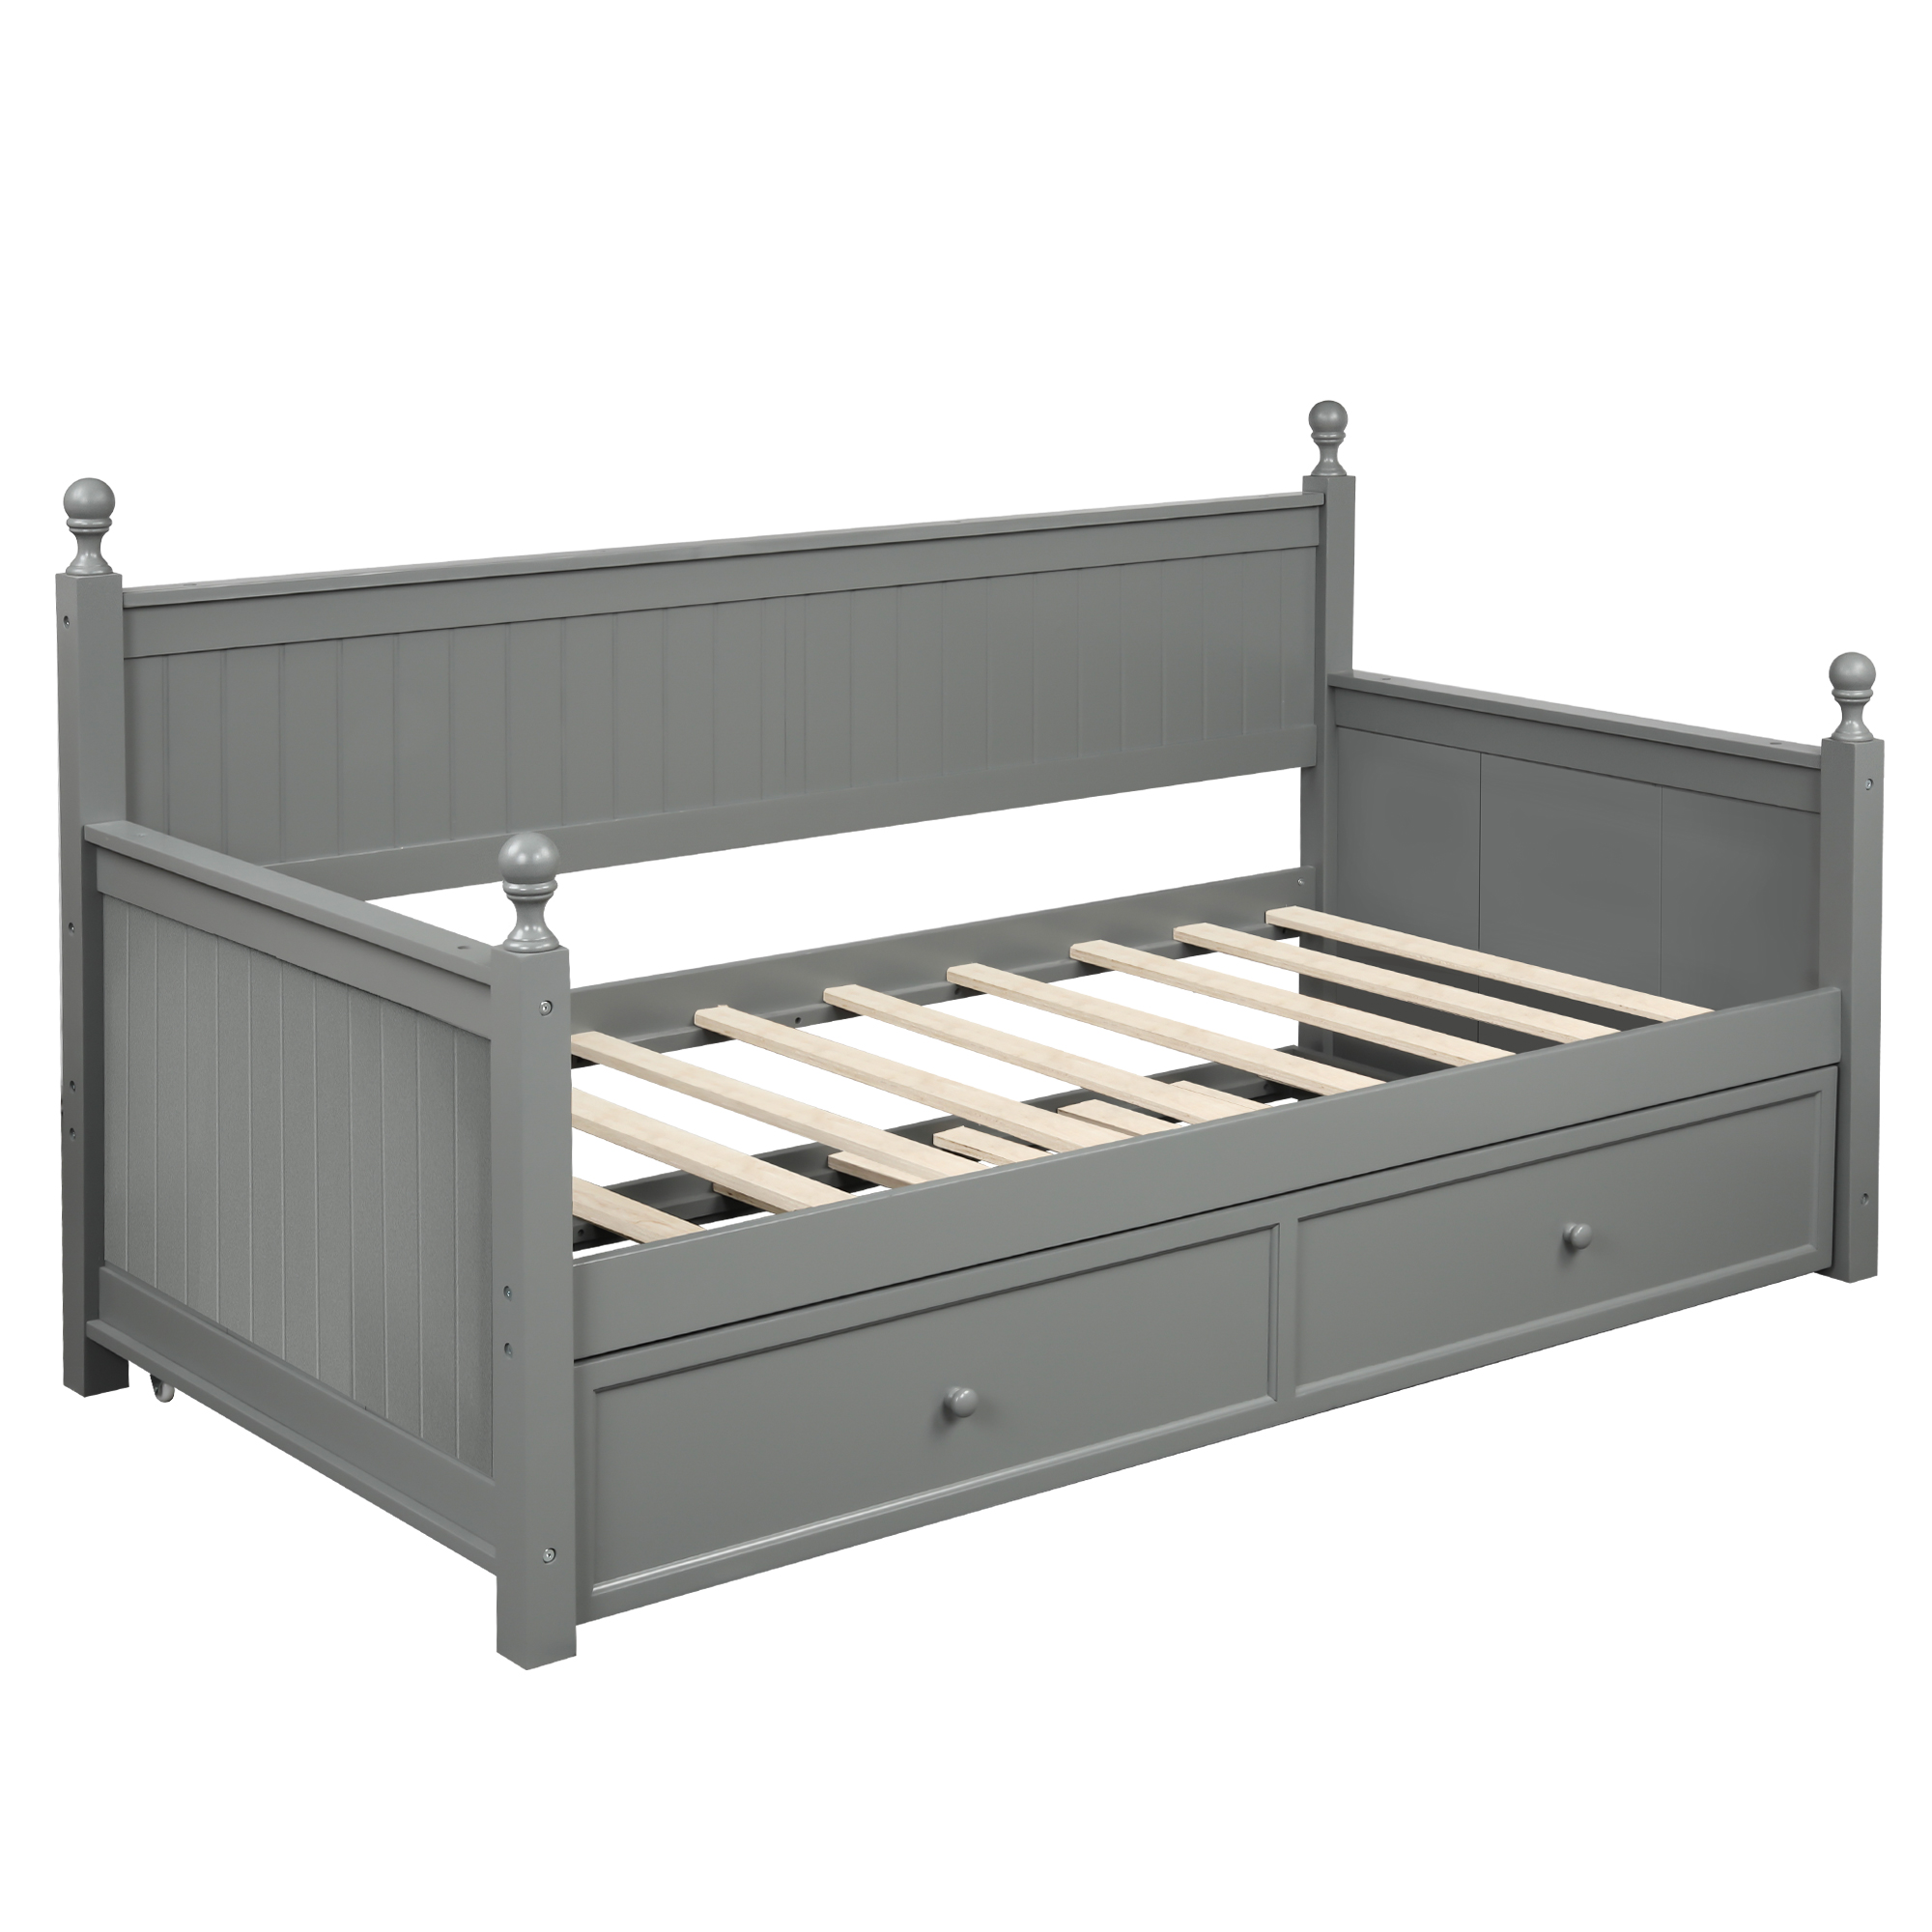 Kepooman Twin Size Modern Wooden Daybed Frame with Twin Size Trundle & Headboard for Bedroom Dorm, 80.5" x 42.1" x 45.41", Gray - image 5 of 14